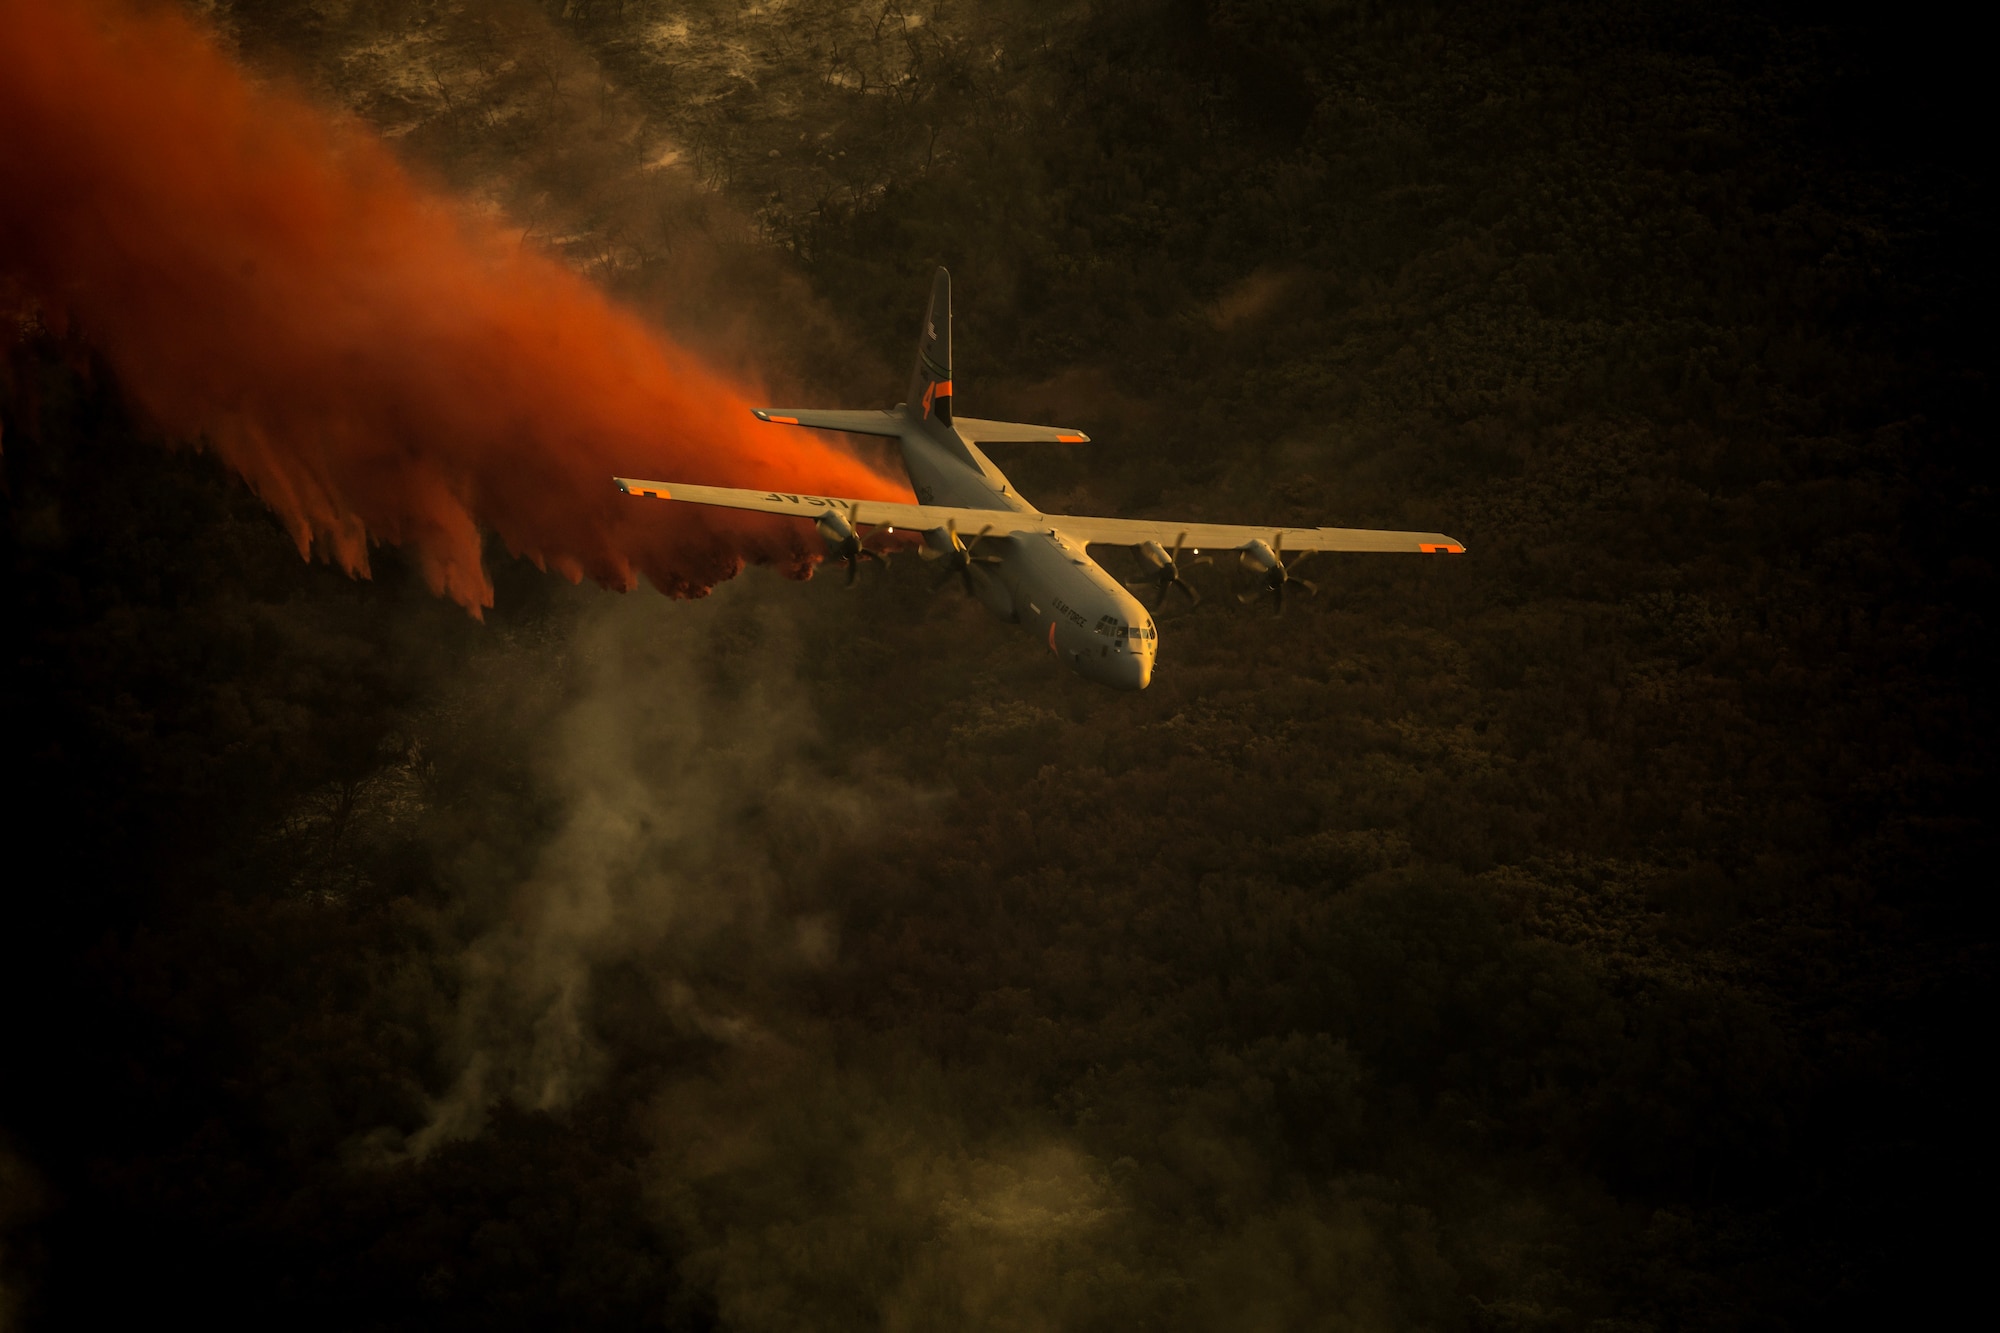 A U.S. Air National Guard C-130J equipped with the MAFFS 2 (Modular Airborne Fire Fighting System) drops a line of Phos-Chek on the Thomas Fire in the hills above the city of Santa Barbara Dec. 13, 2017. The C-130J from the 146th Airlift Wing has been supporting CAL FIRE’s efforts to battle the Thomas Fire raging in Southern California. (U.S. Air National Guard photo illustration by: Master Sgt. Nieko Carzis.)